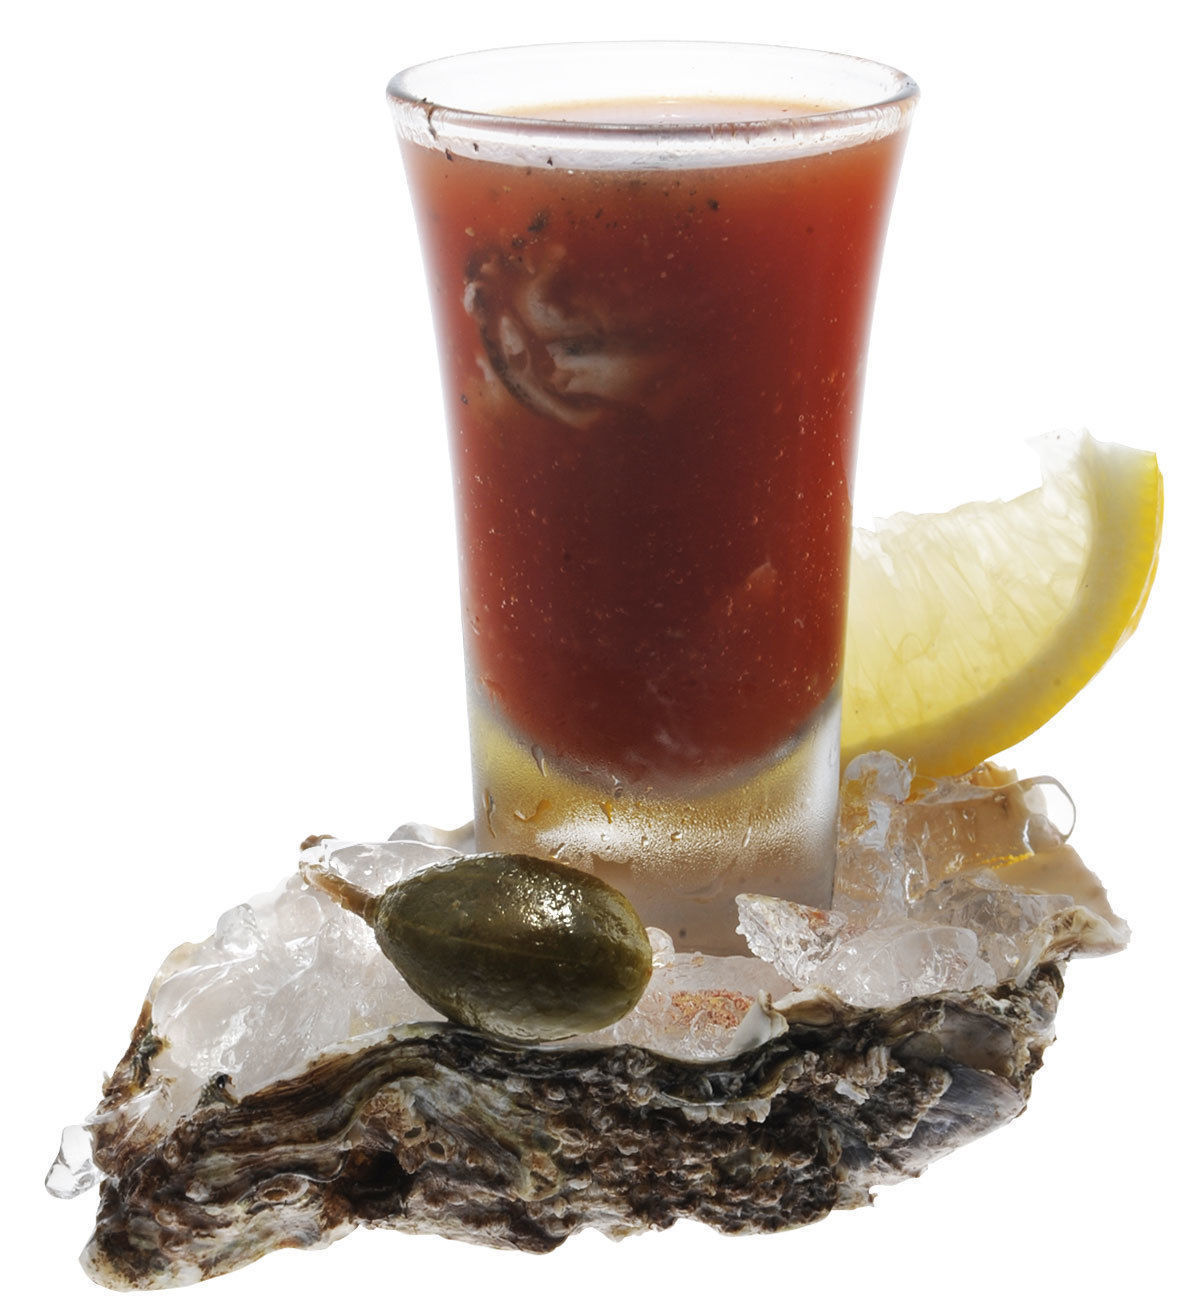 How to Make the Oyster Shooter